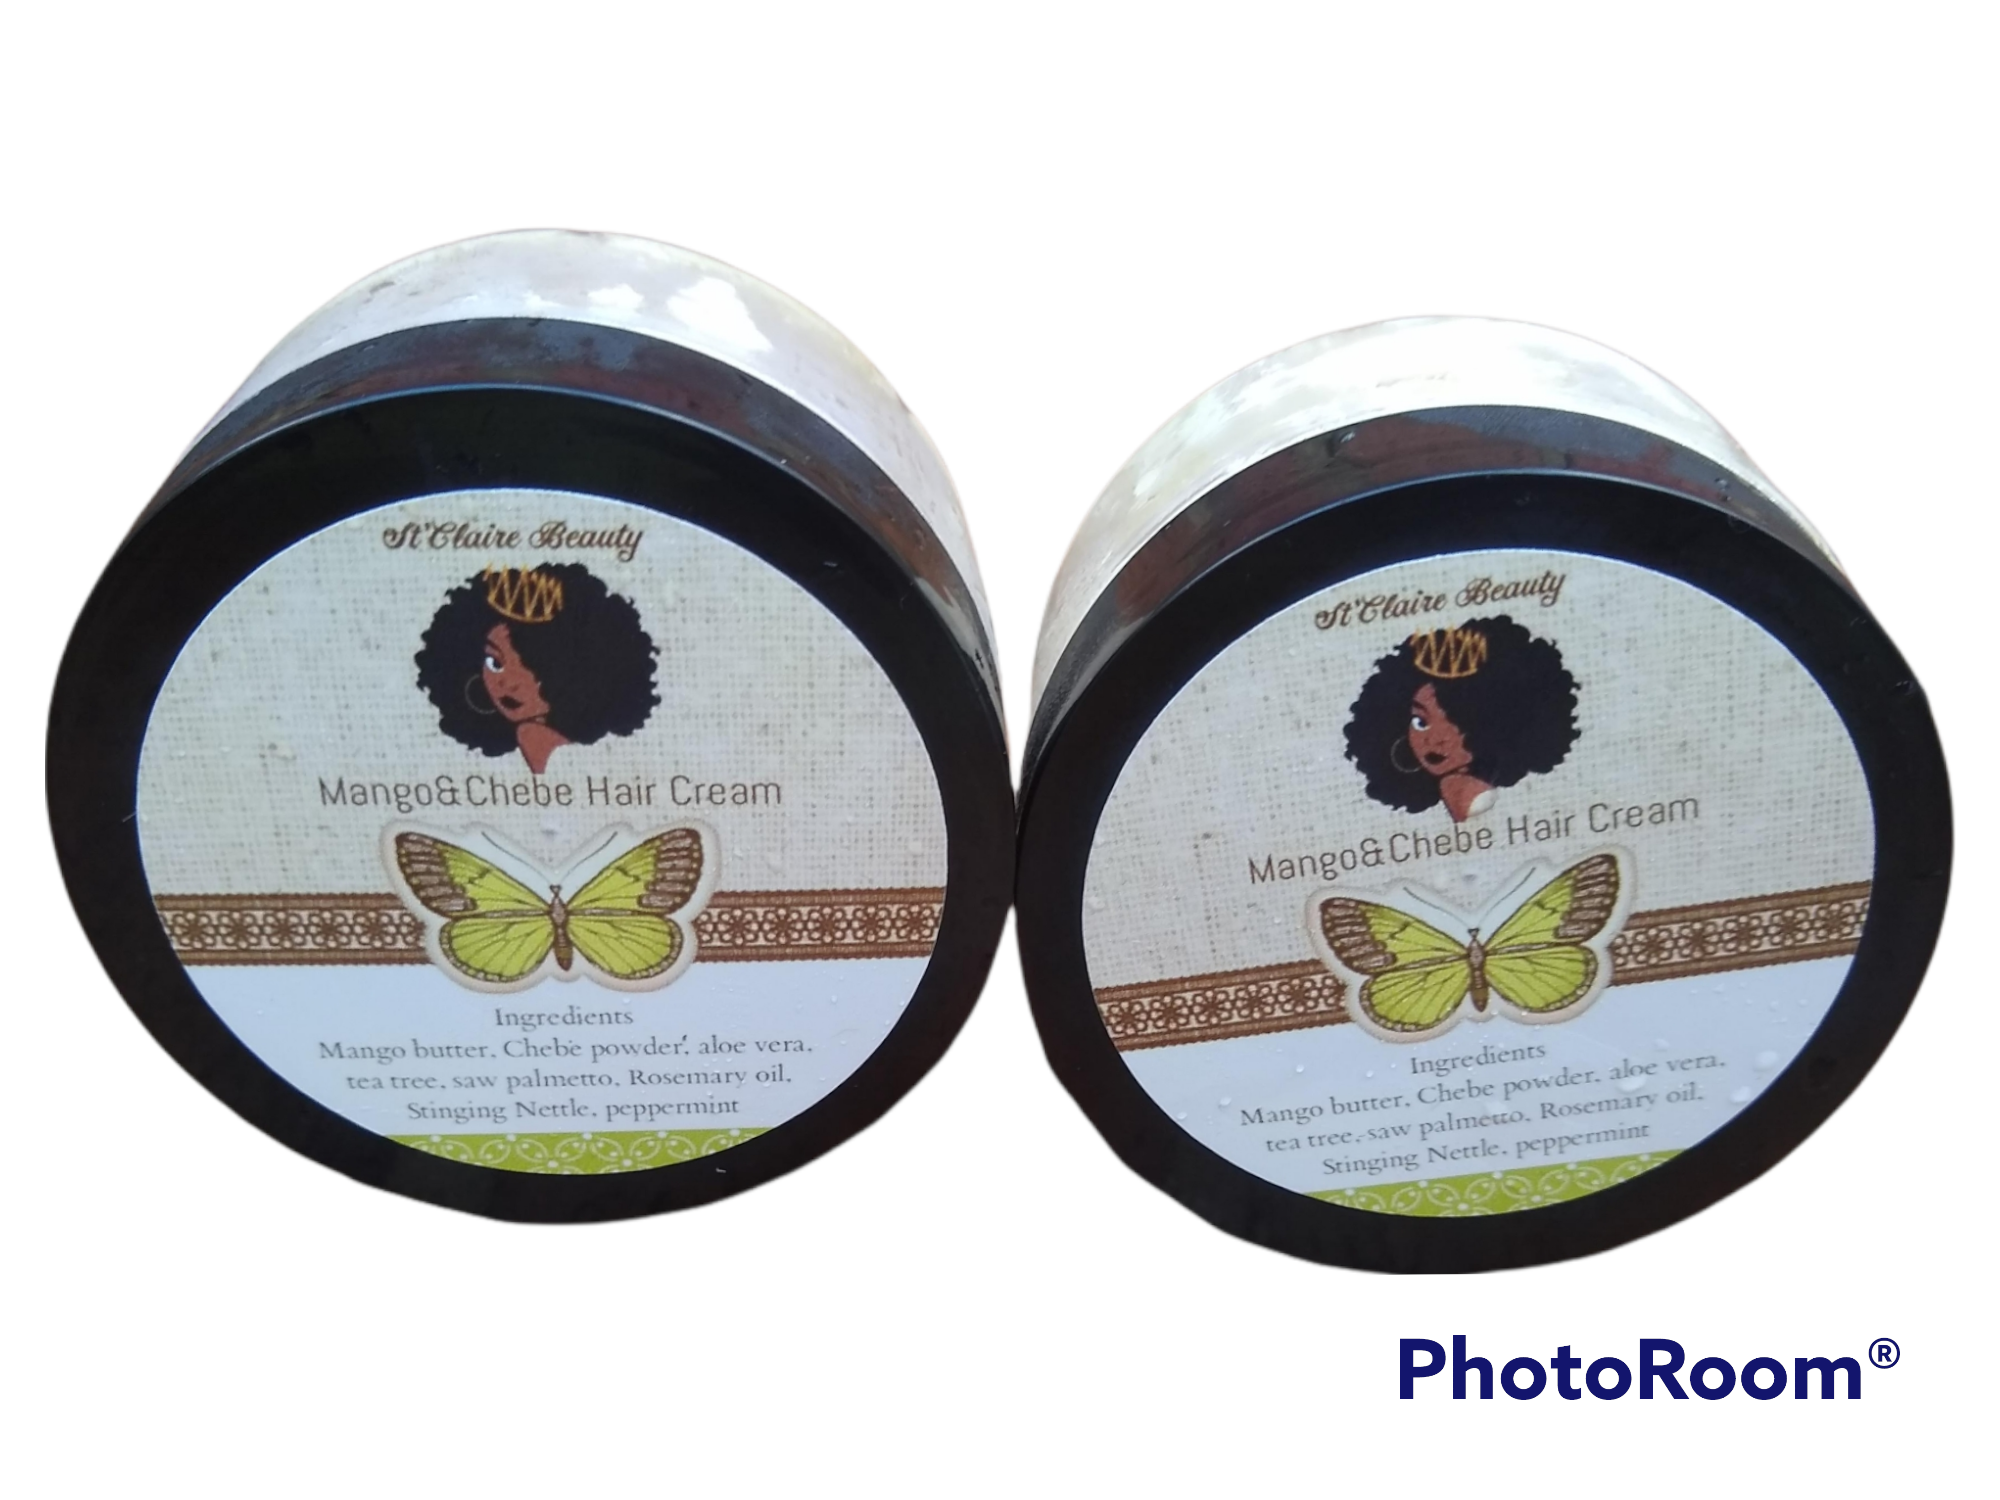 Chebe Butter for Hair Growth